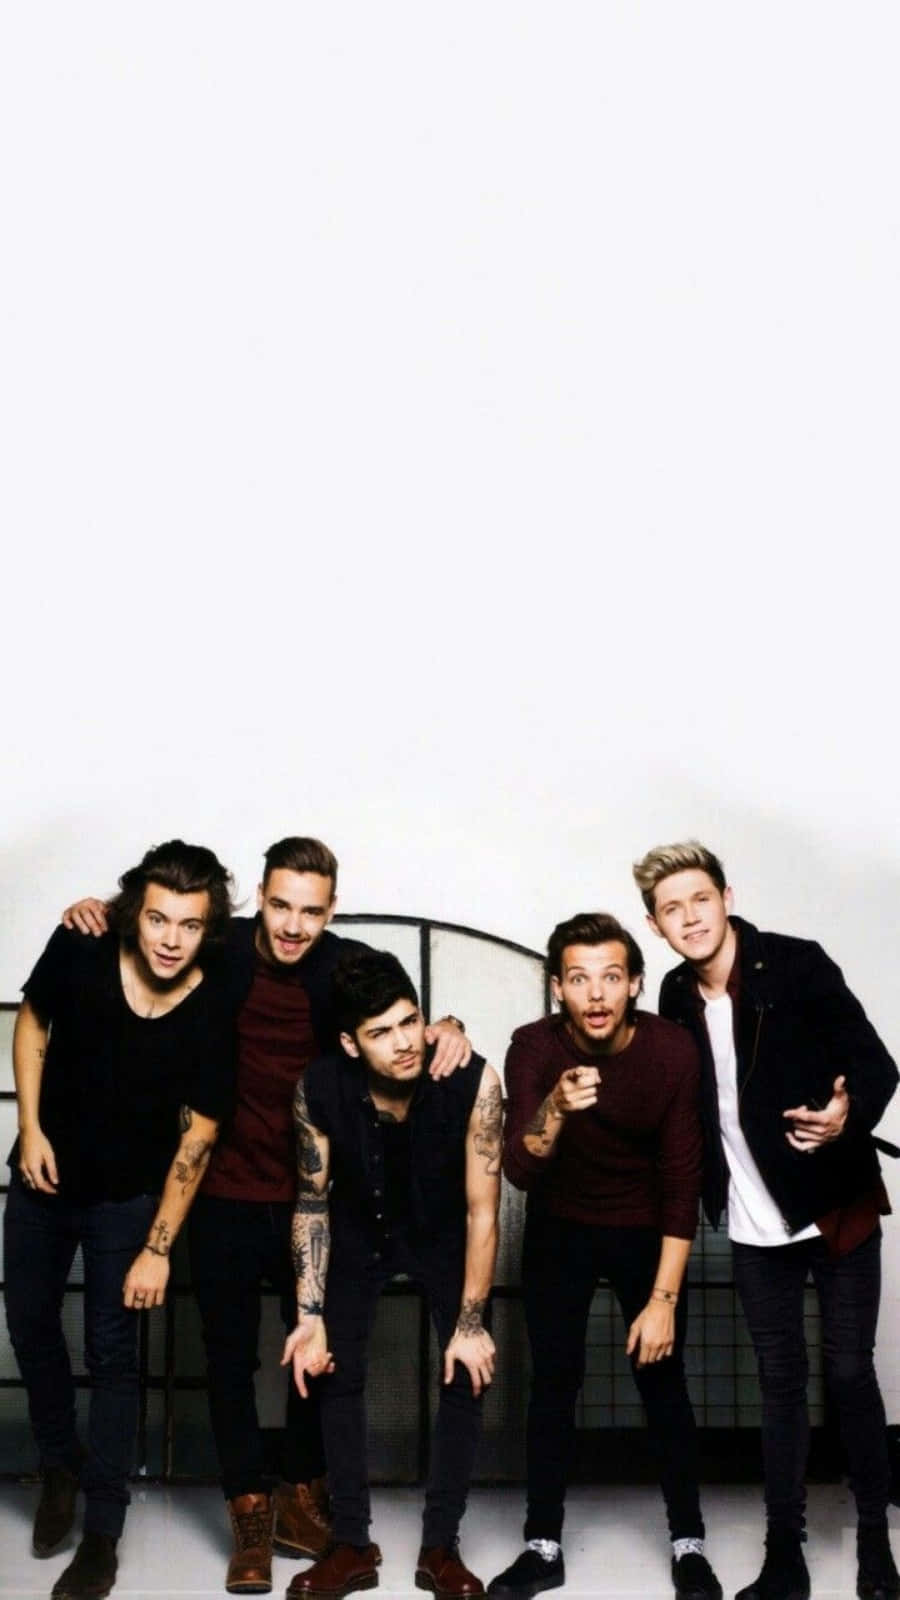 Download White Boy Band 1 Direction Iphone Wallpaper | Wallpapers.com